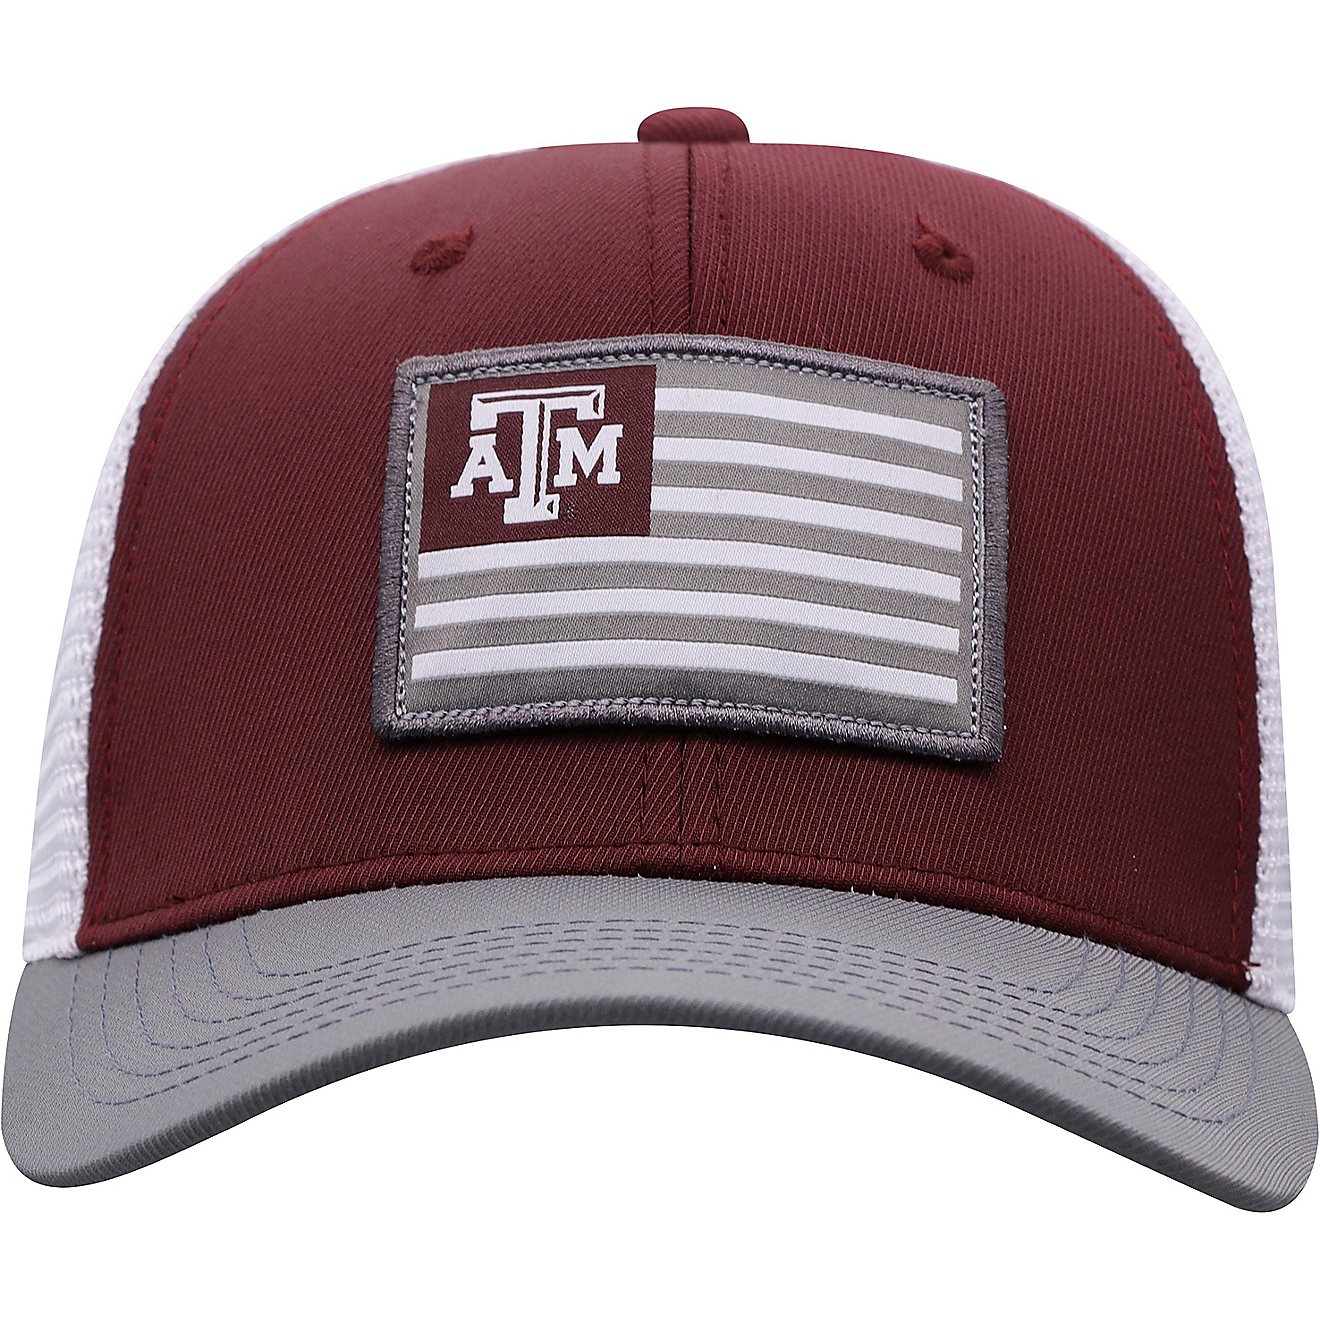 Top of the World Texas A&M University Pedigree 1 Fit Cap                                                                         - view number 3